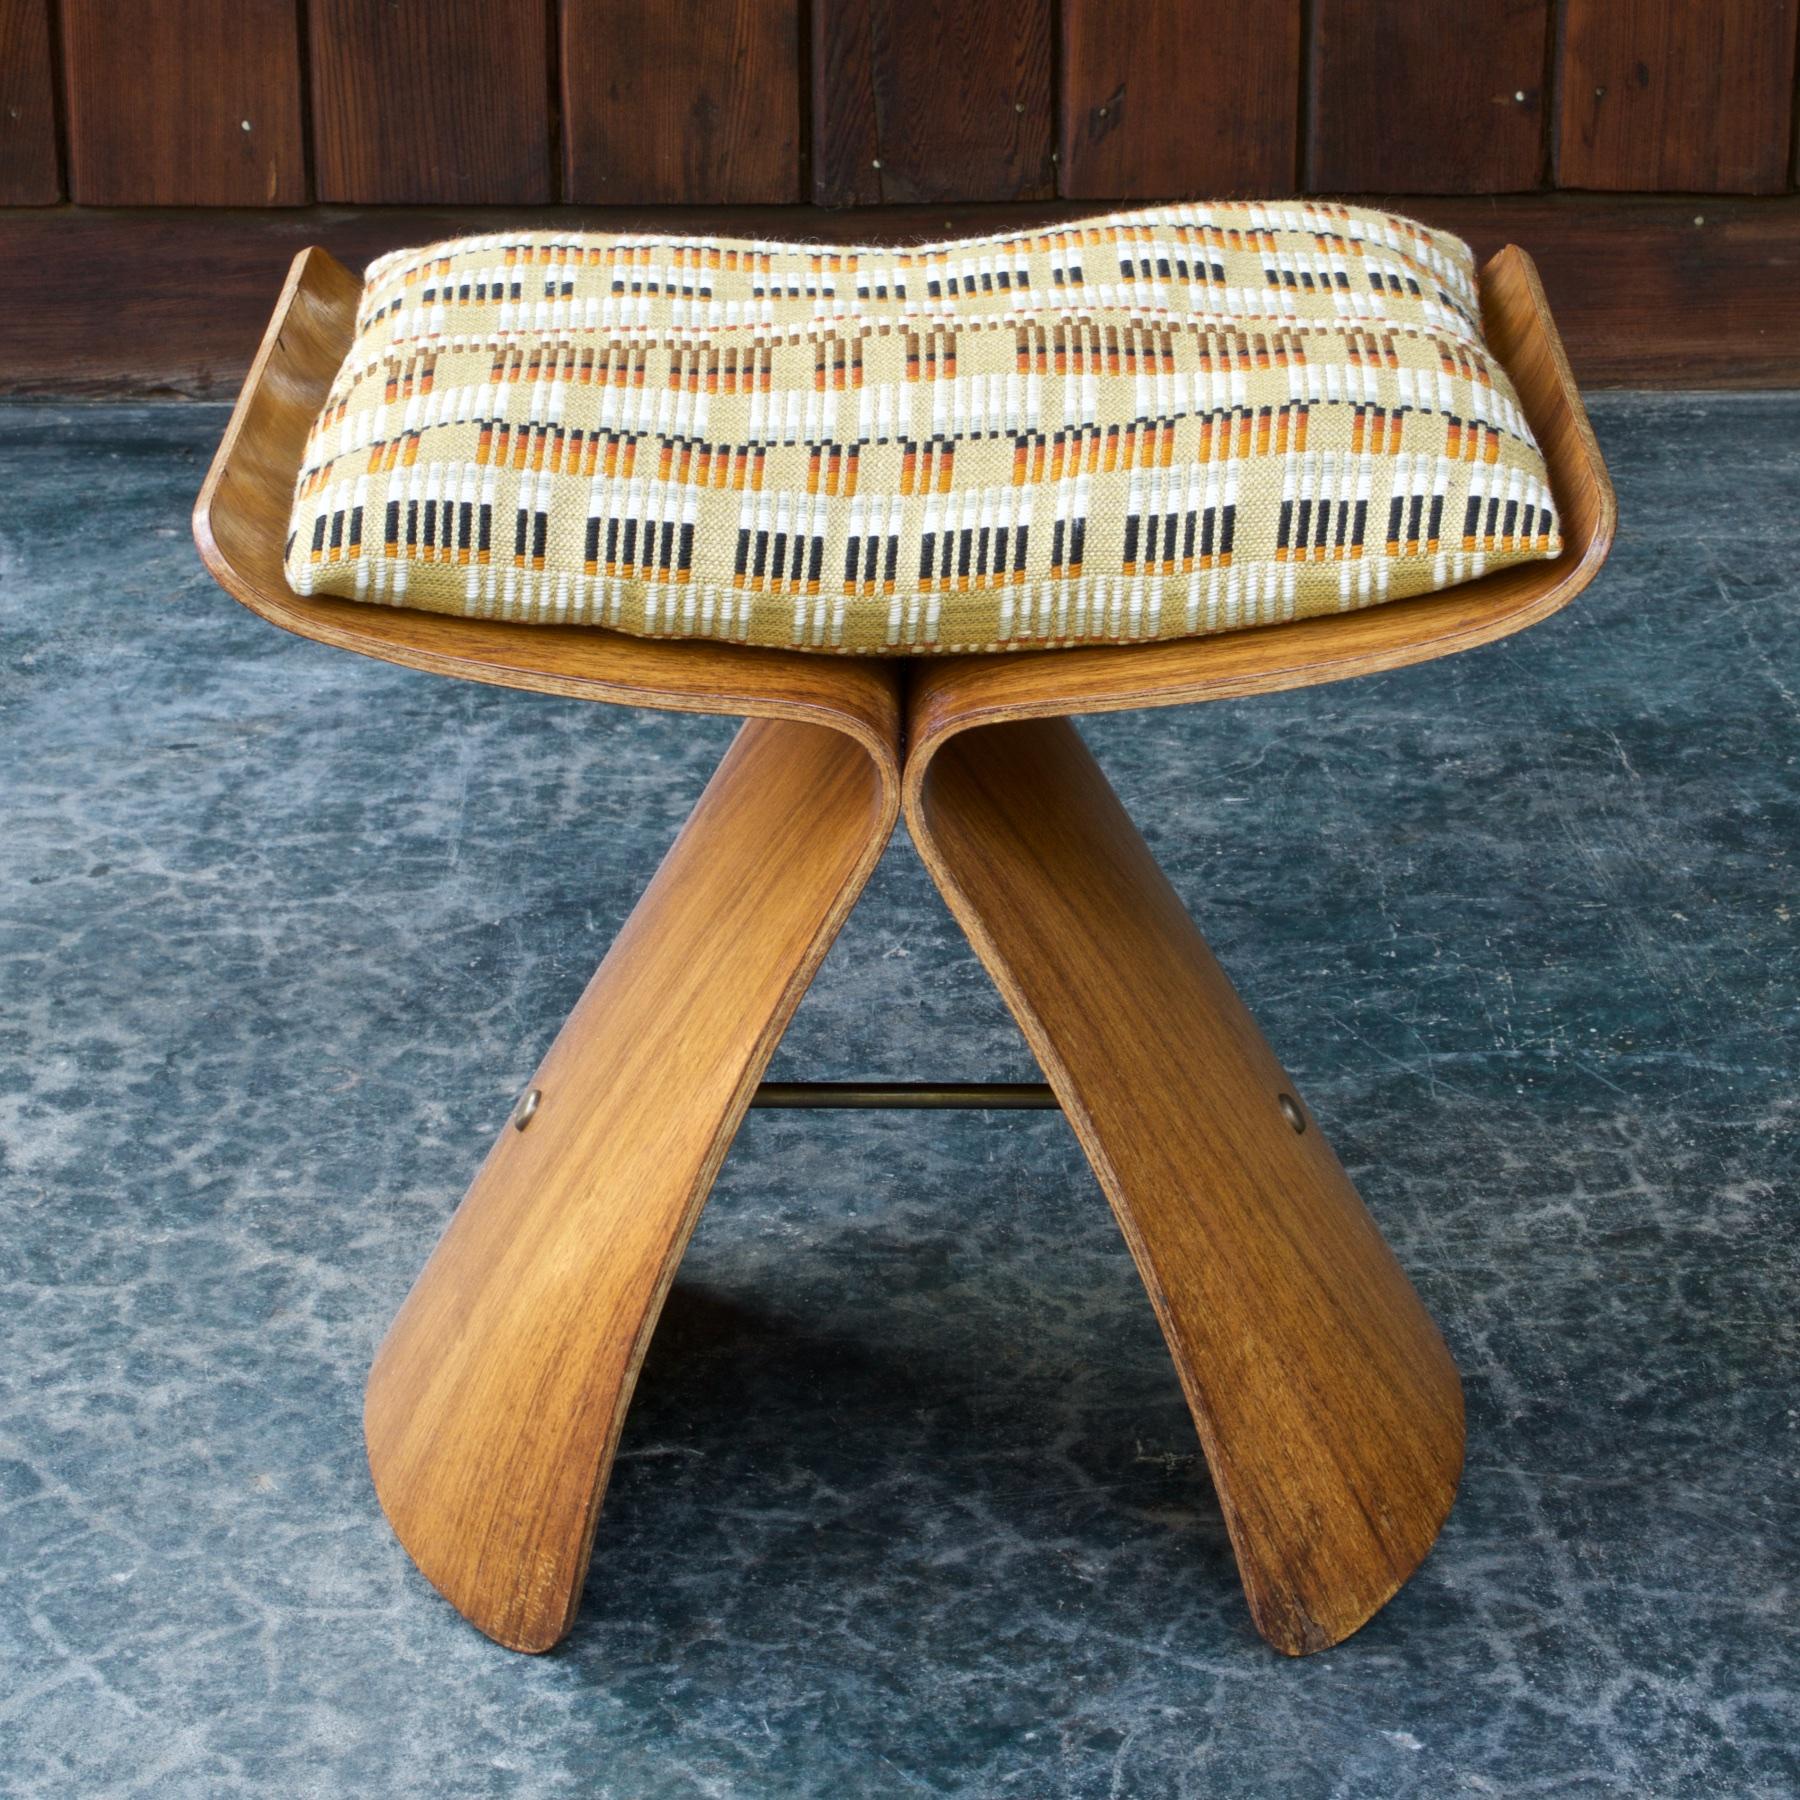 Well used 1950s butterfly stool. This stool can still be used, tested by 165 pound person, no yawning, no cracks that go all the way through the plywood anywhere, just veneer losses all along the bottom edges.  This is shown in image 3. Vintage